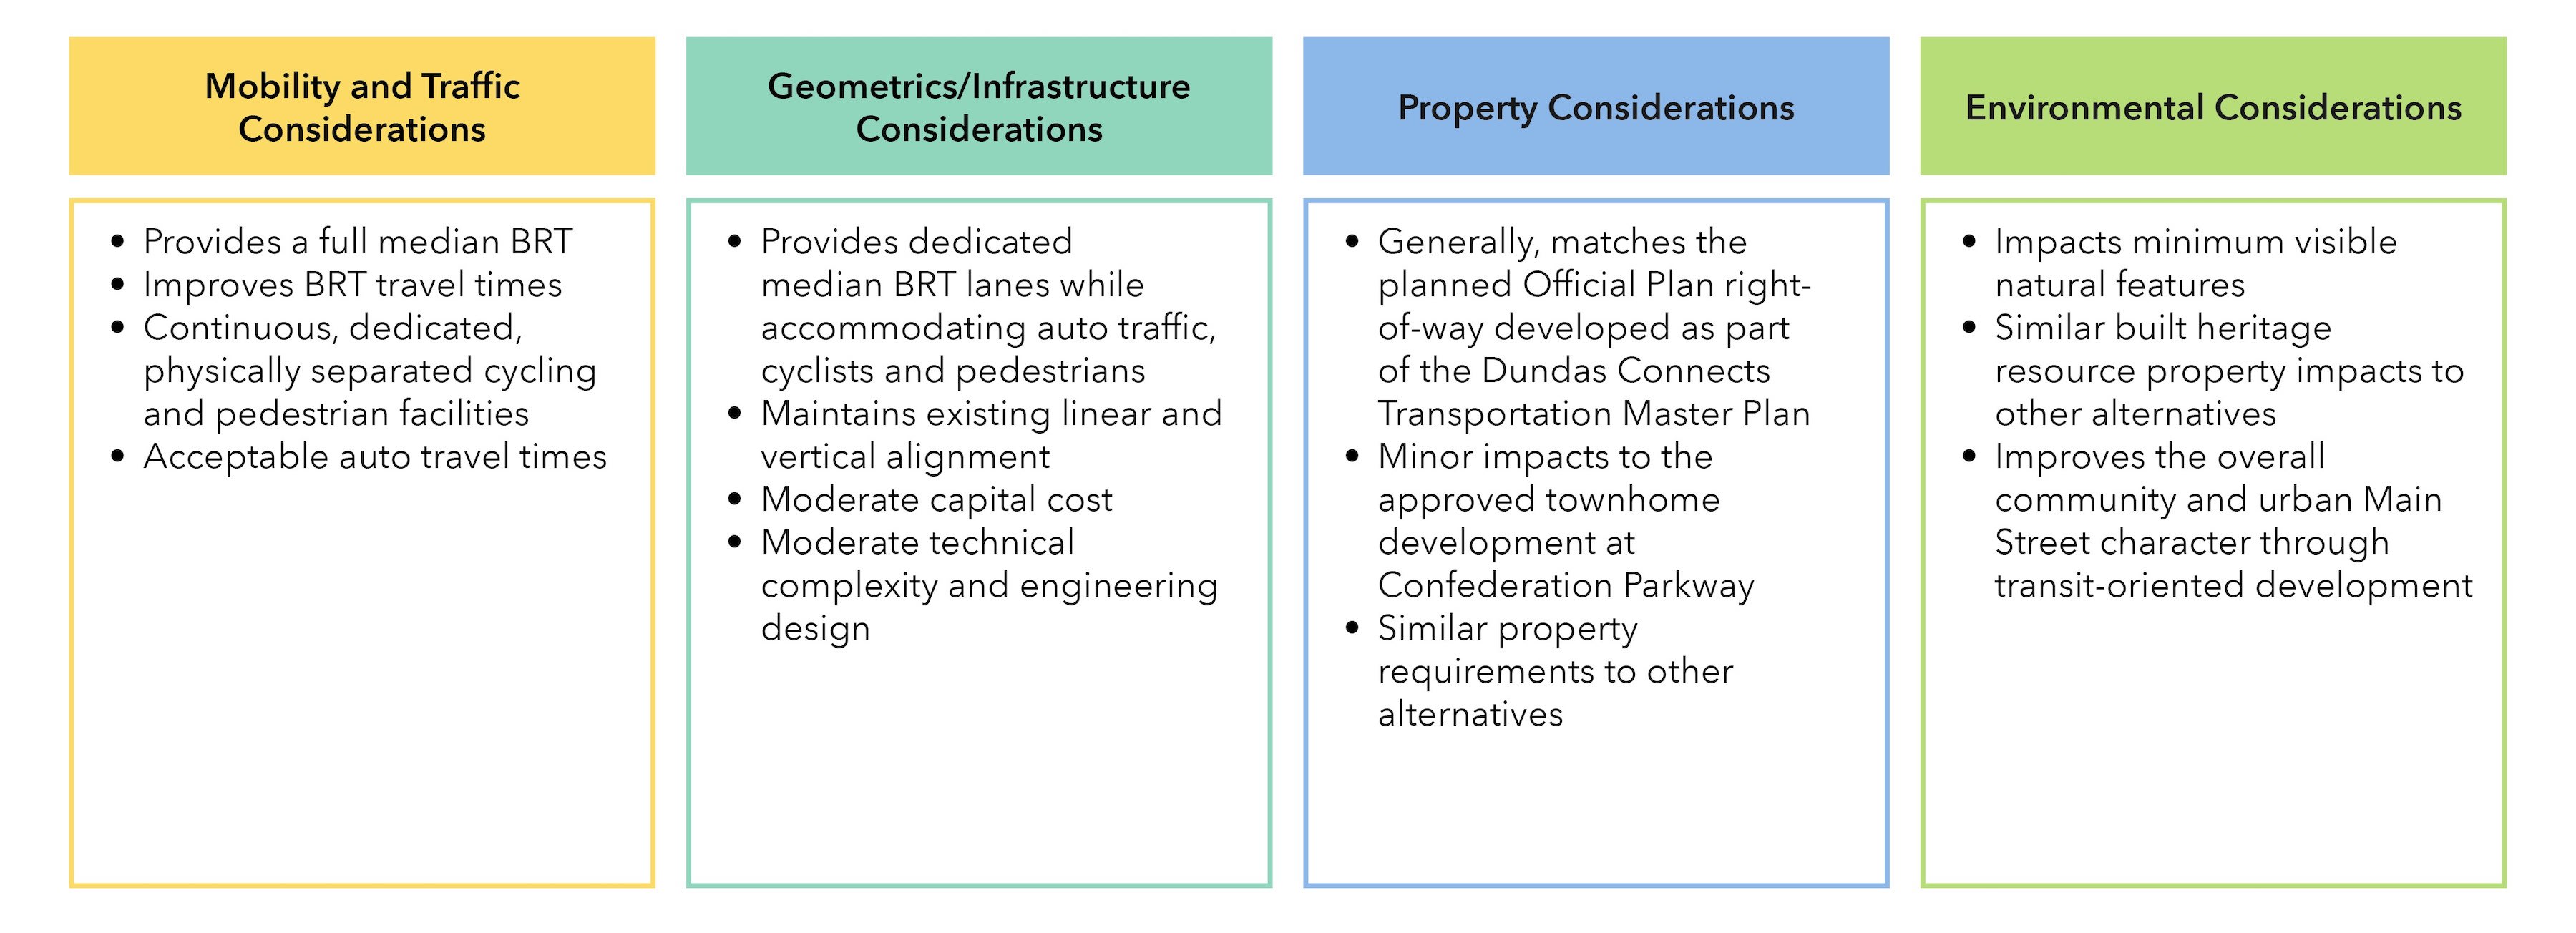 Infrastructure, Property and Environmental Considerations.